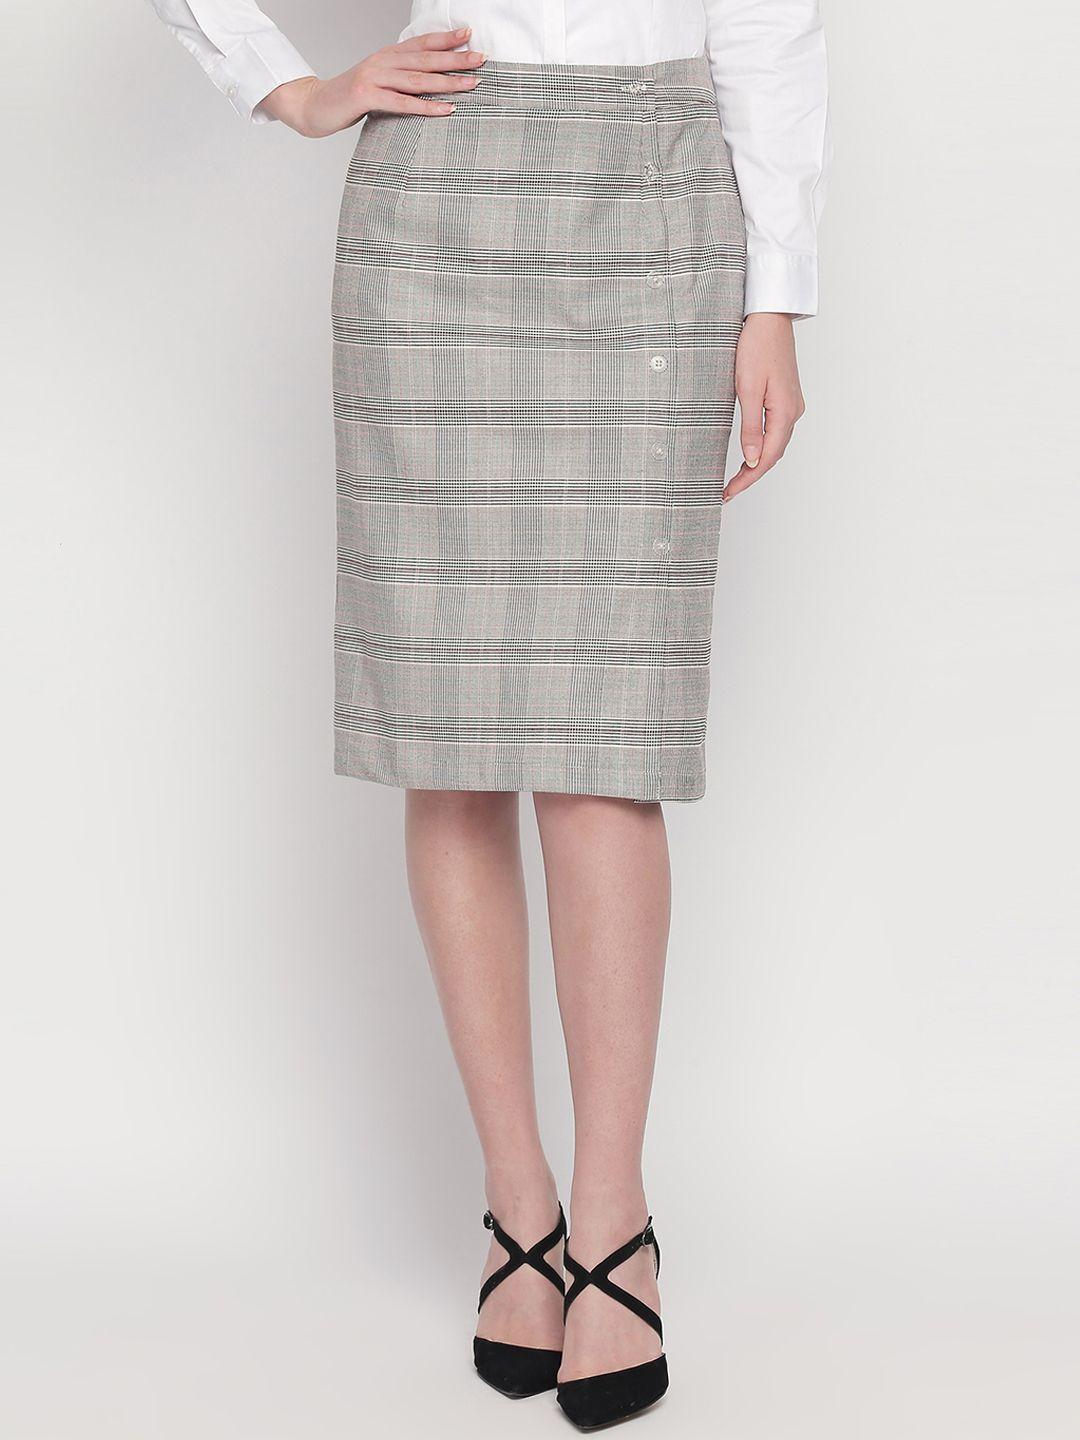 annabelle by pantaloons women white & black checked a-line skirt